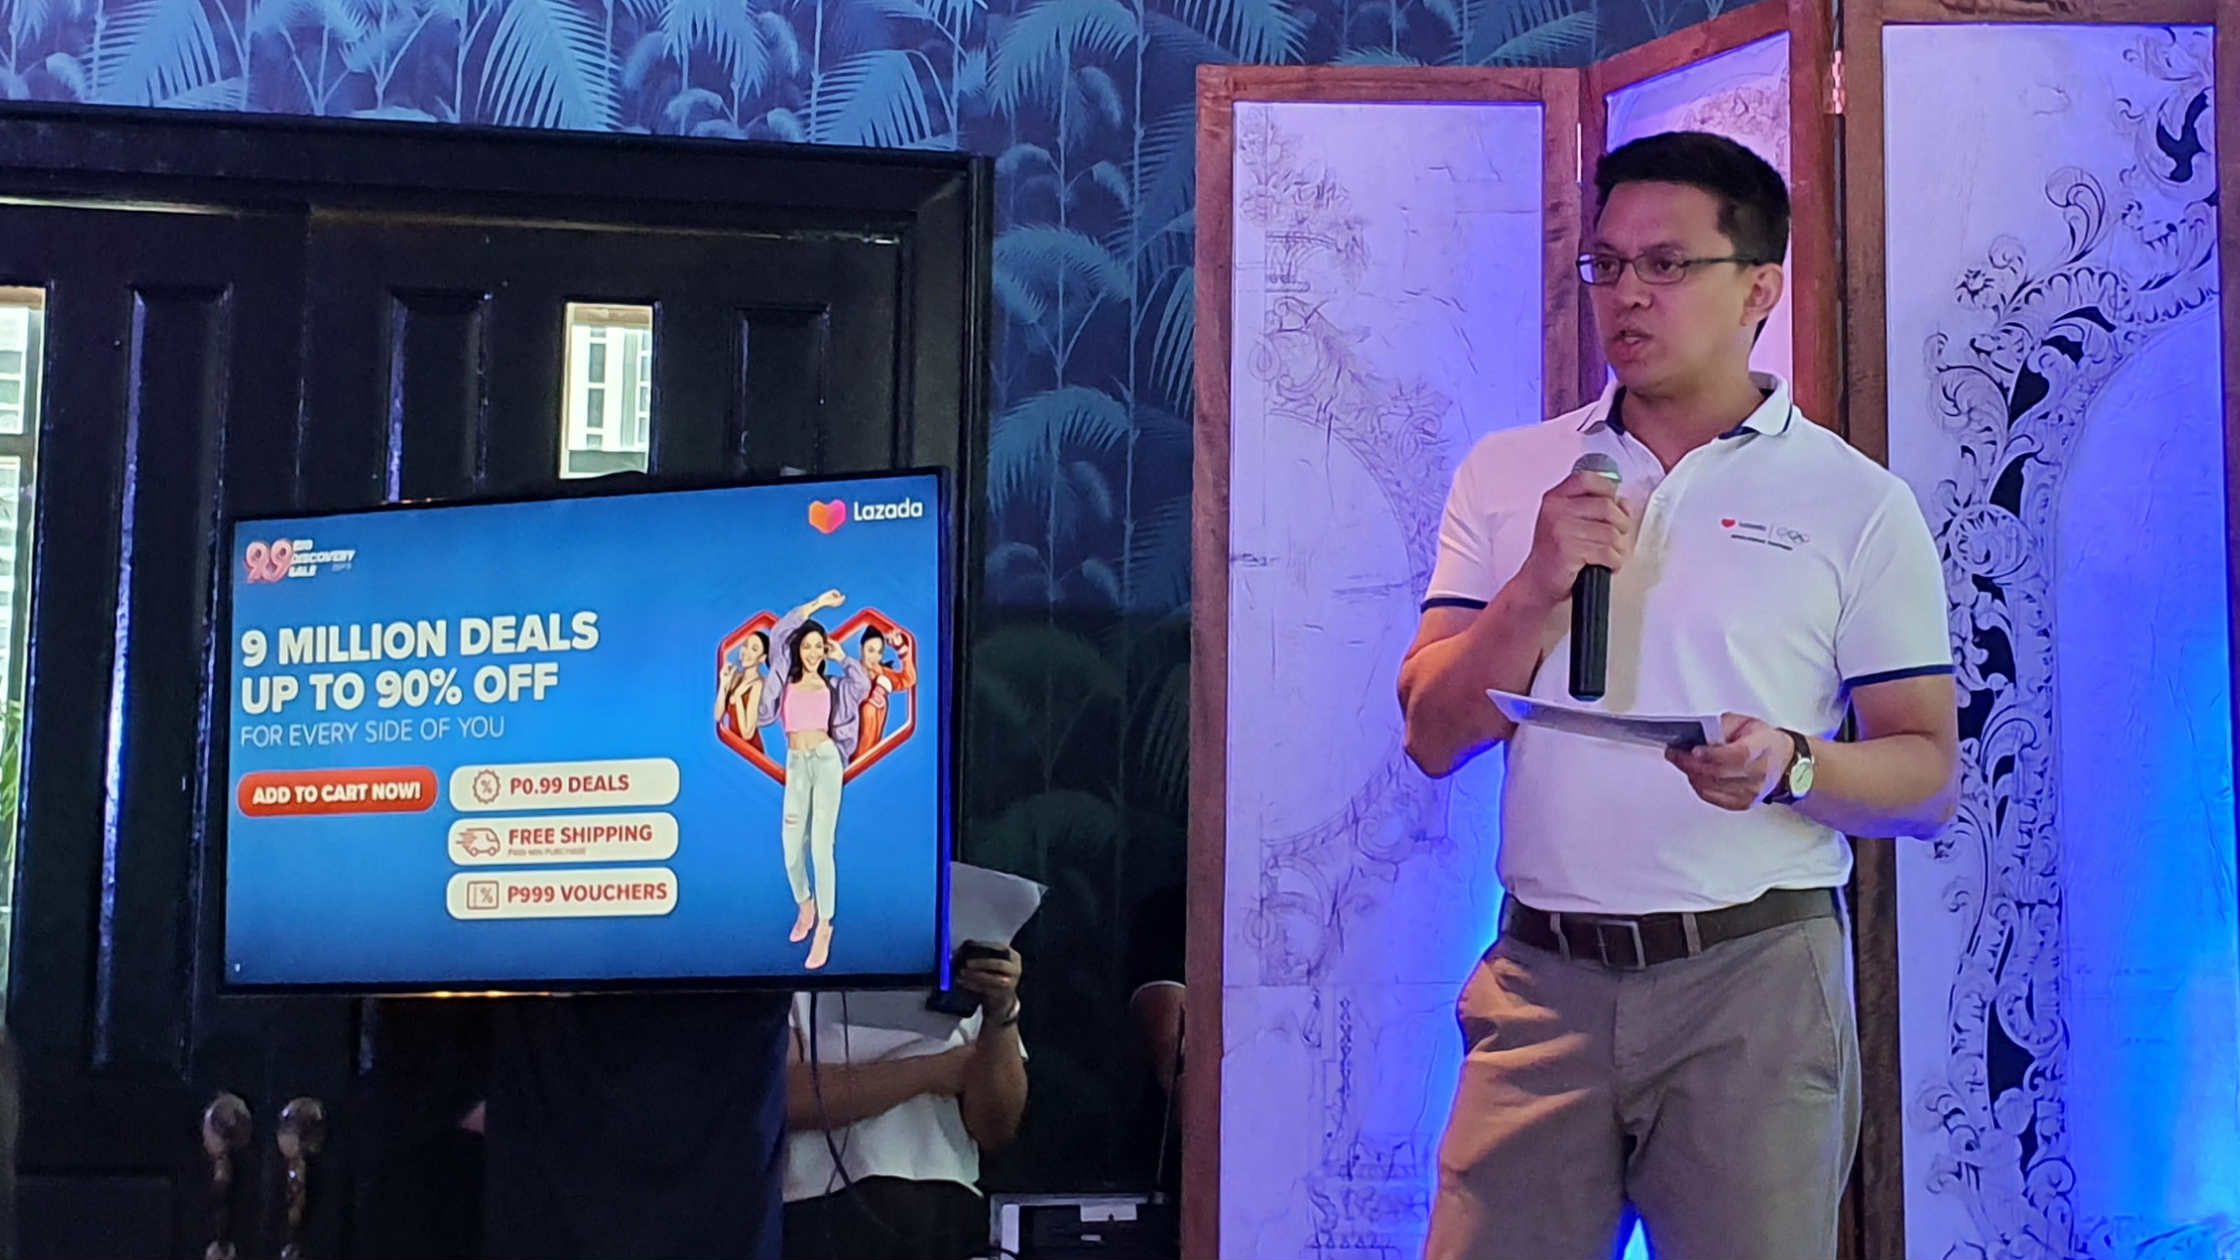 ‘Lazada Loans,’ new customer collection points announced in time for annual 9.9 sale